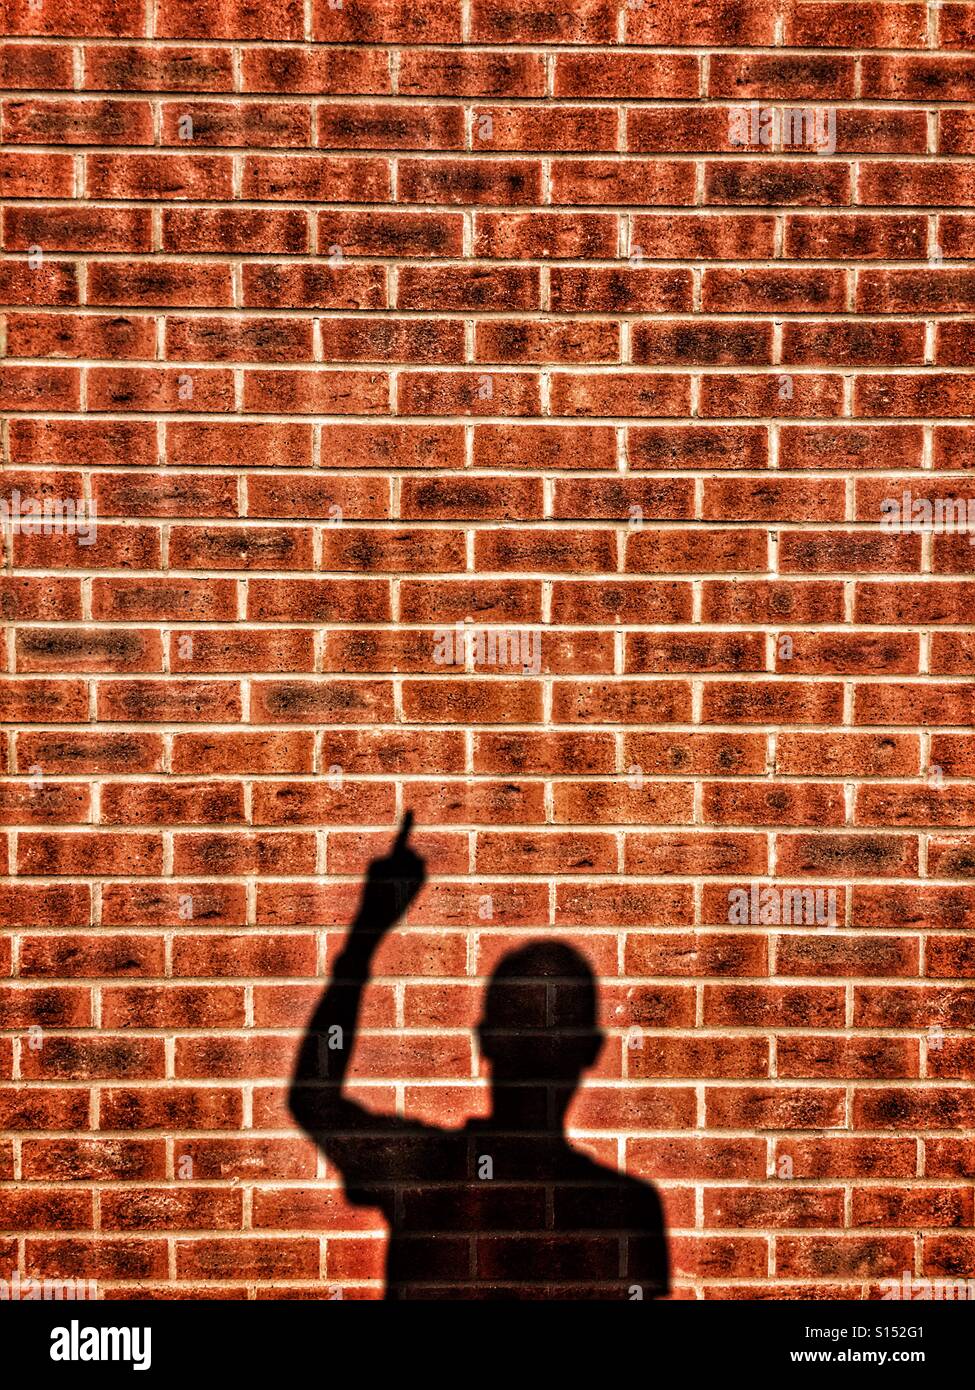 Shadow of man pointing on a brick wall Stock Photo